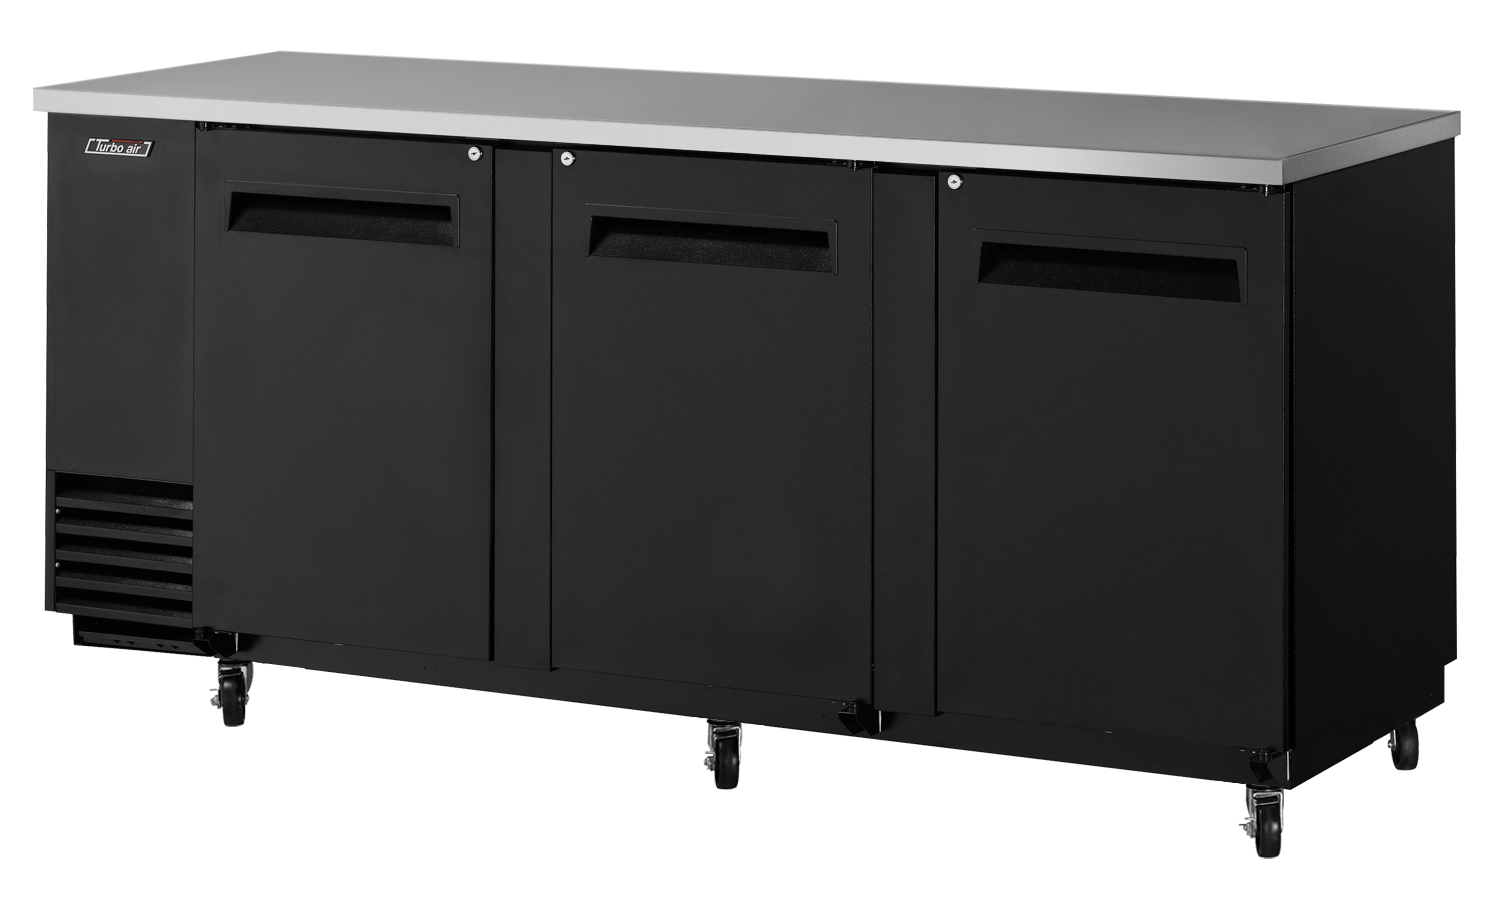 Back Bar Cooler, three-section